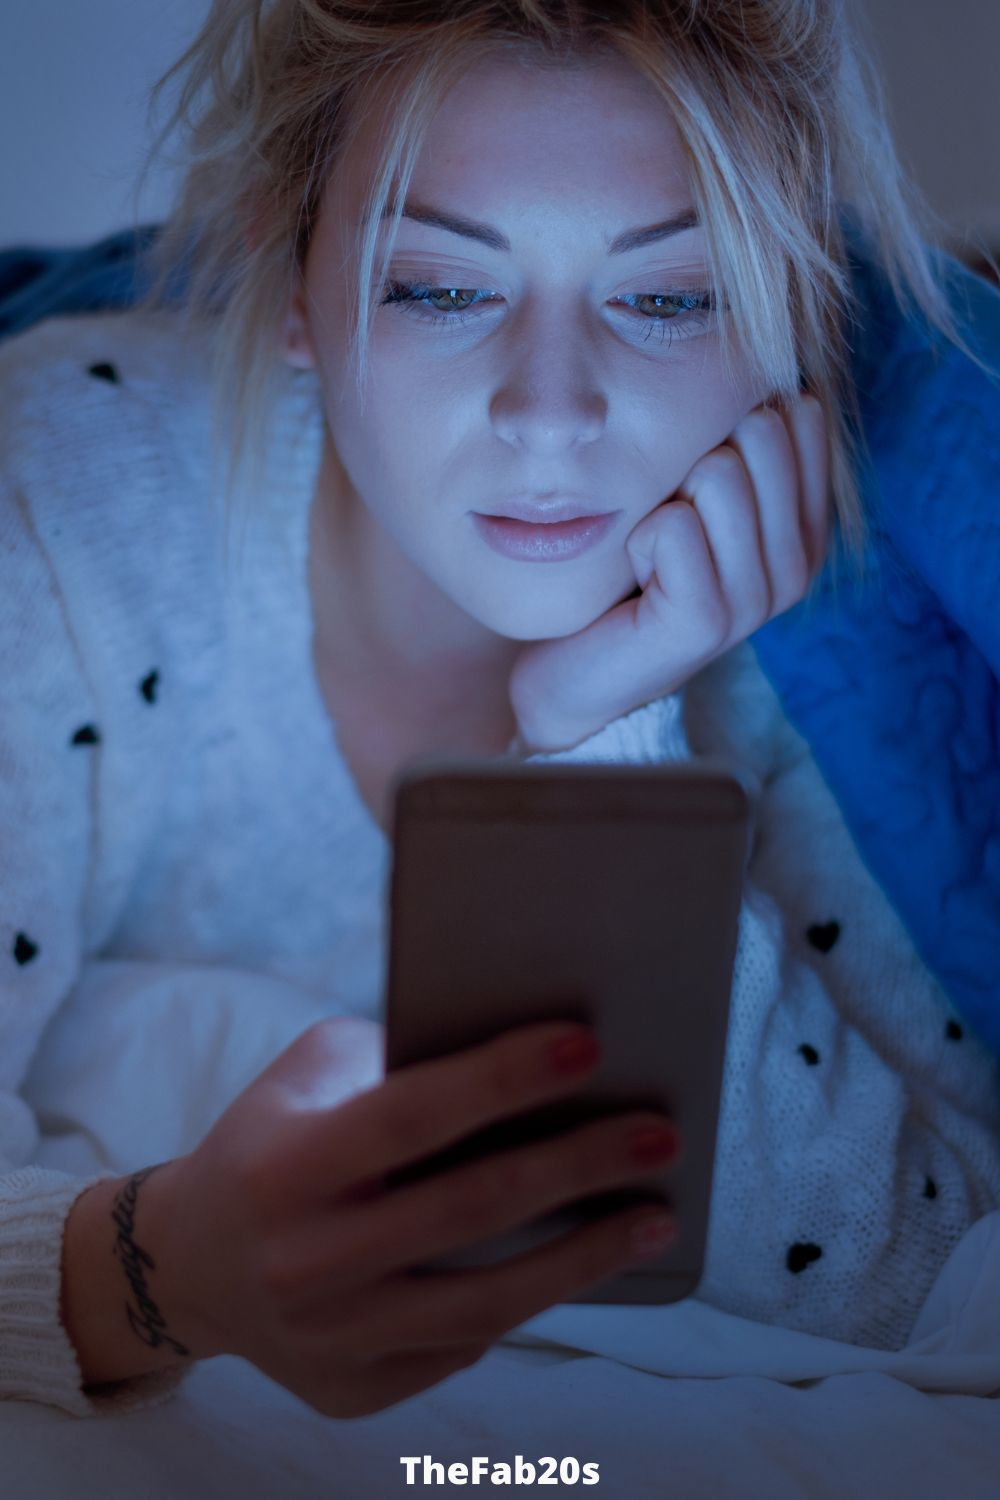 Woman under covers checking phone